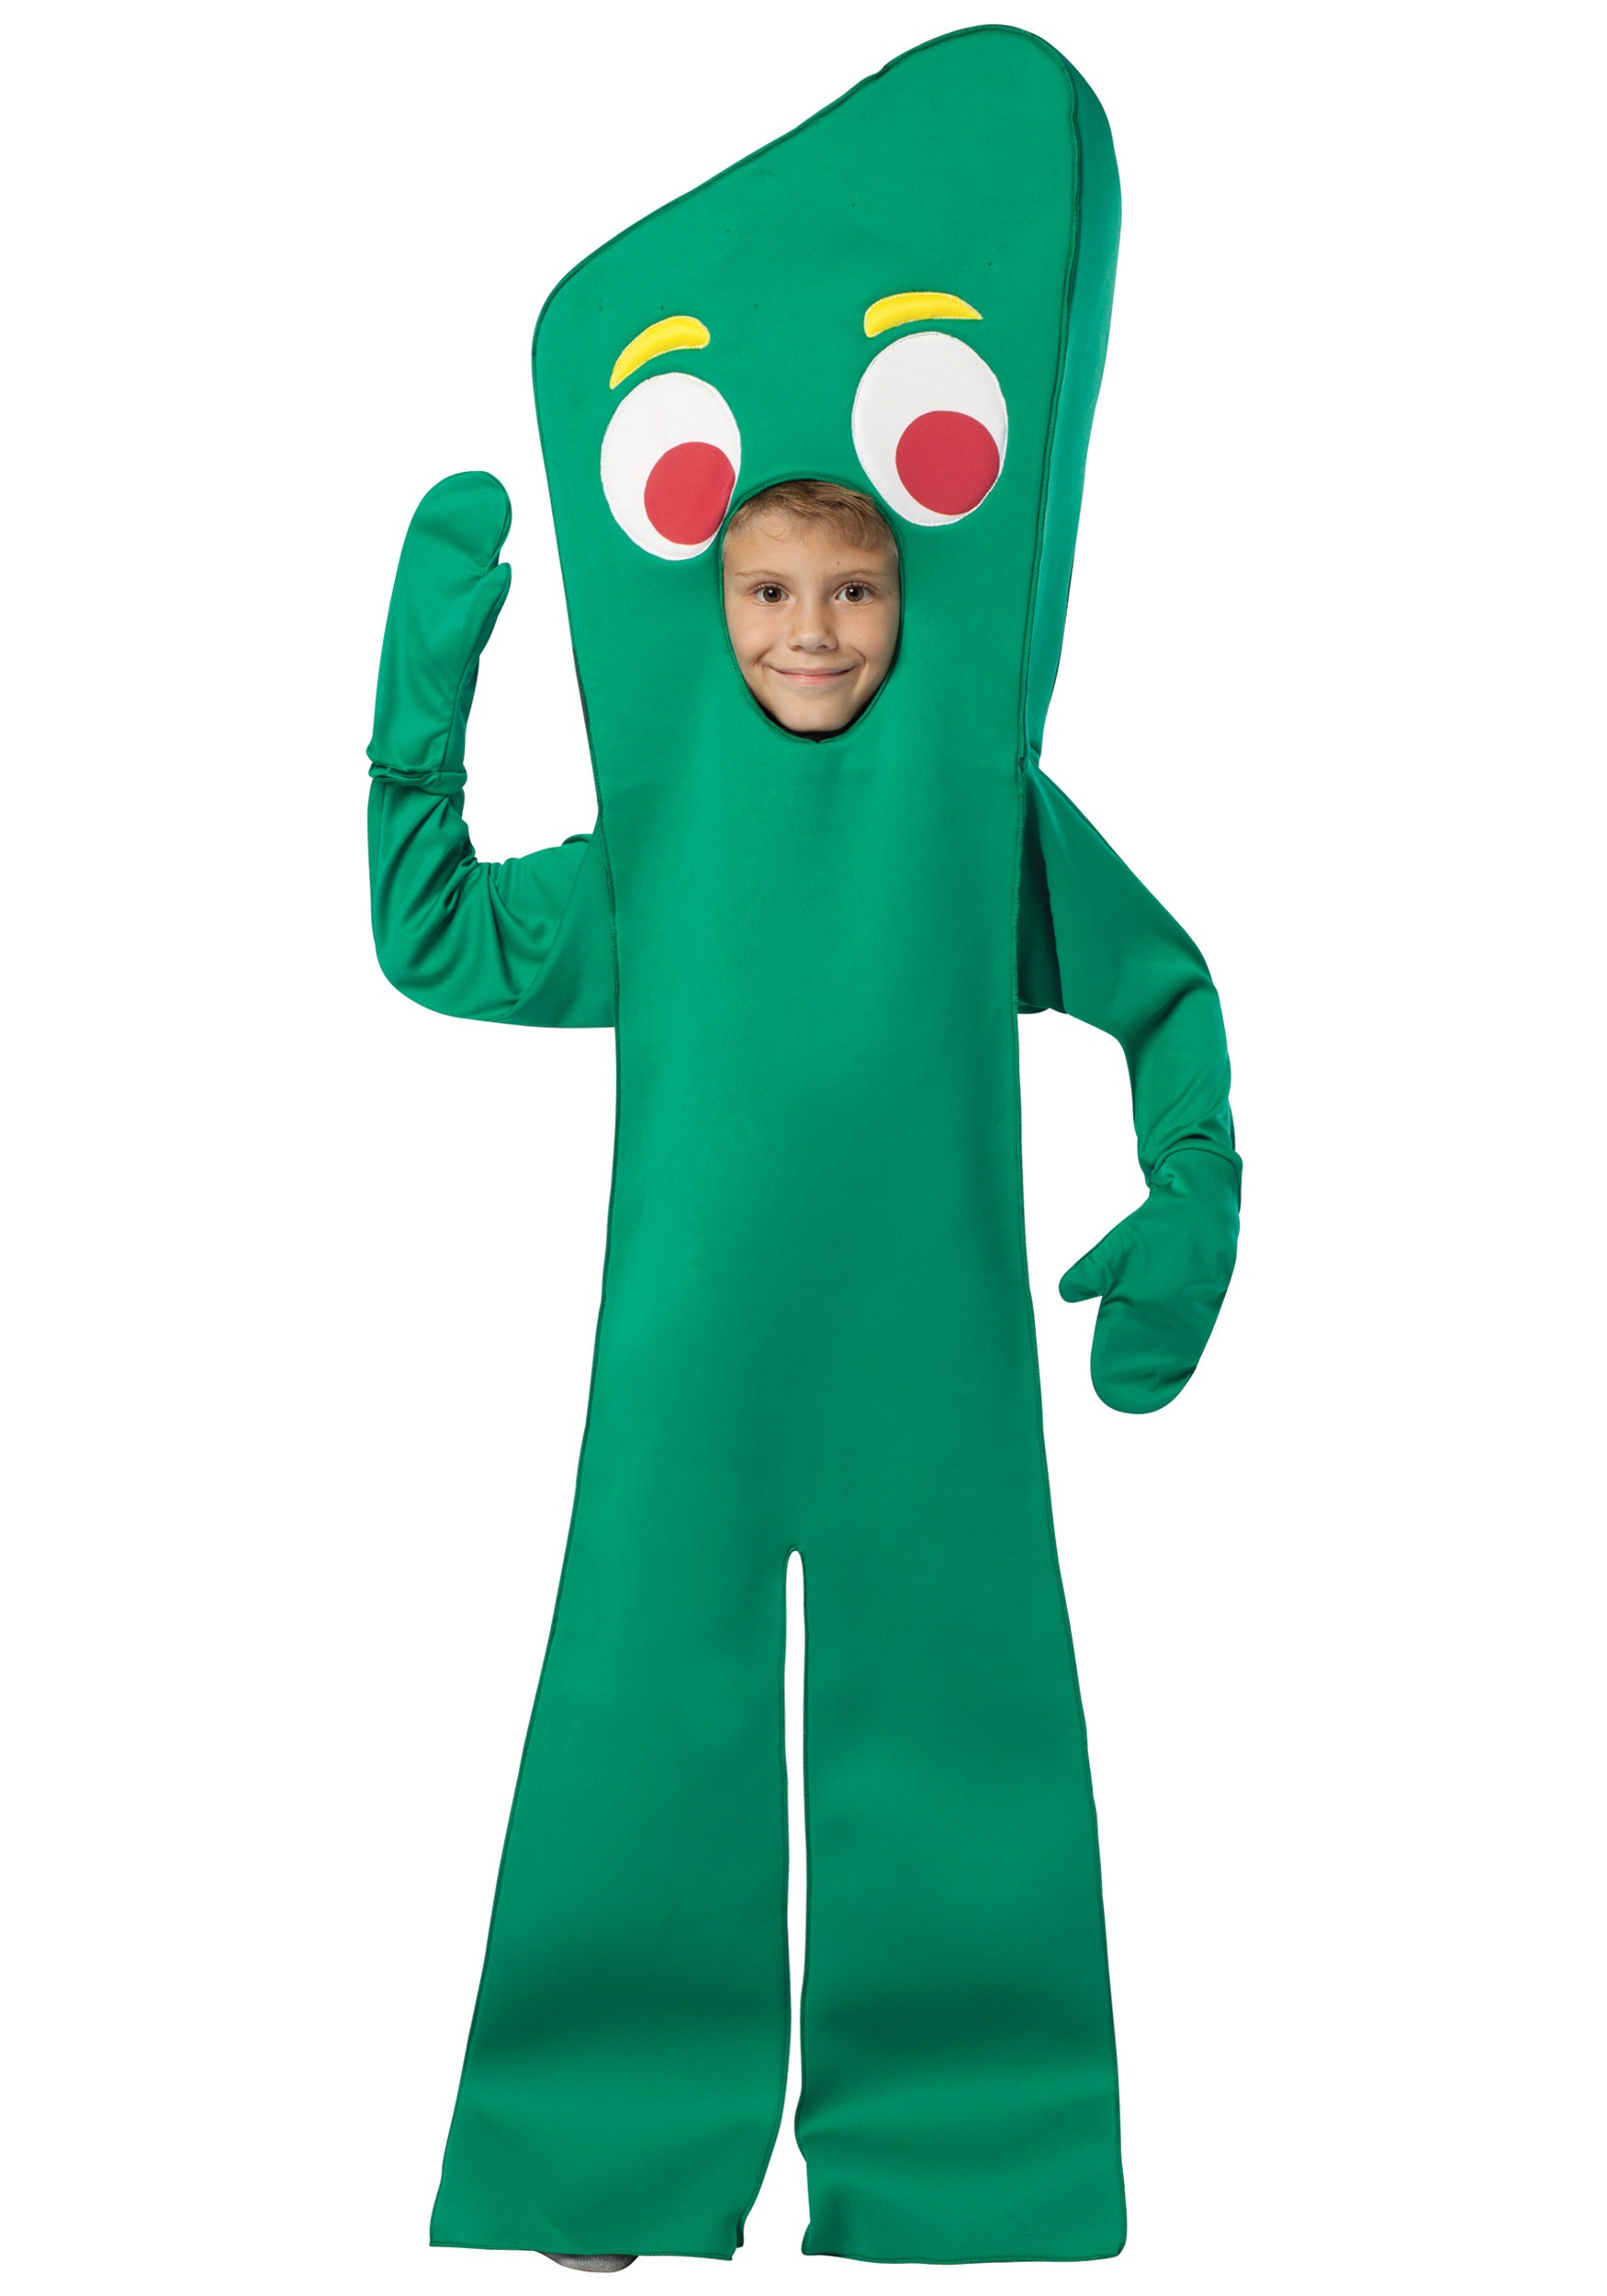 Gumby, originally a famous stop motion clay animation character, later bein...